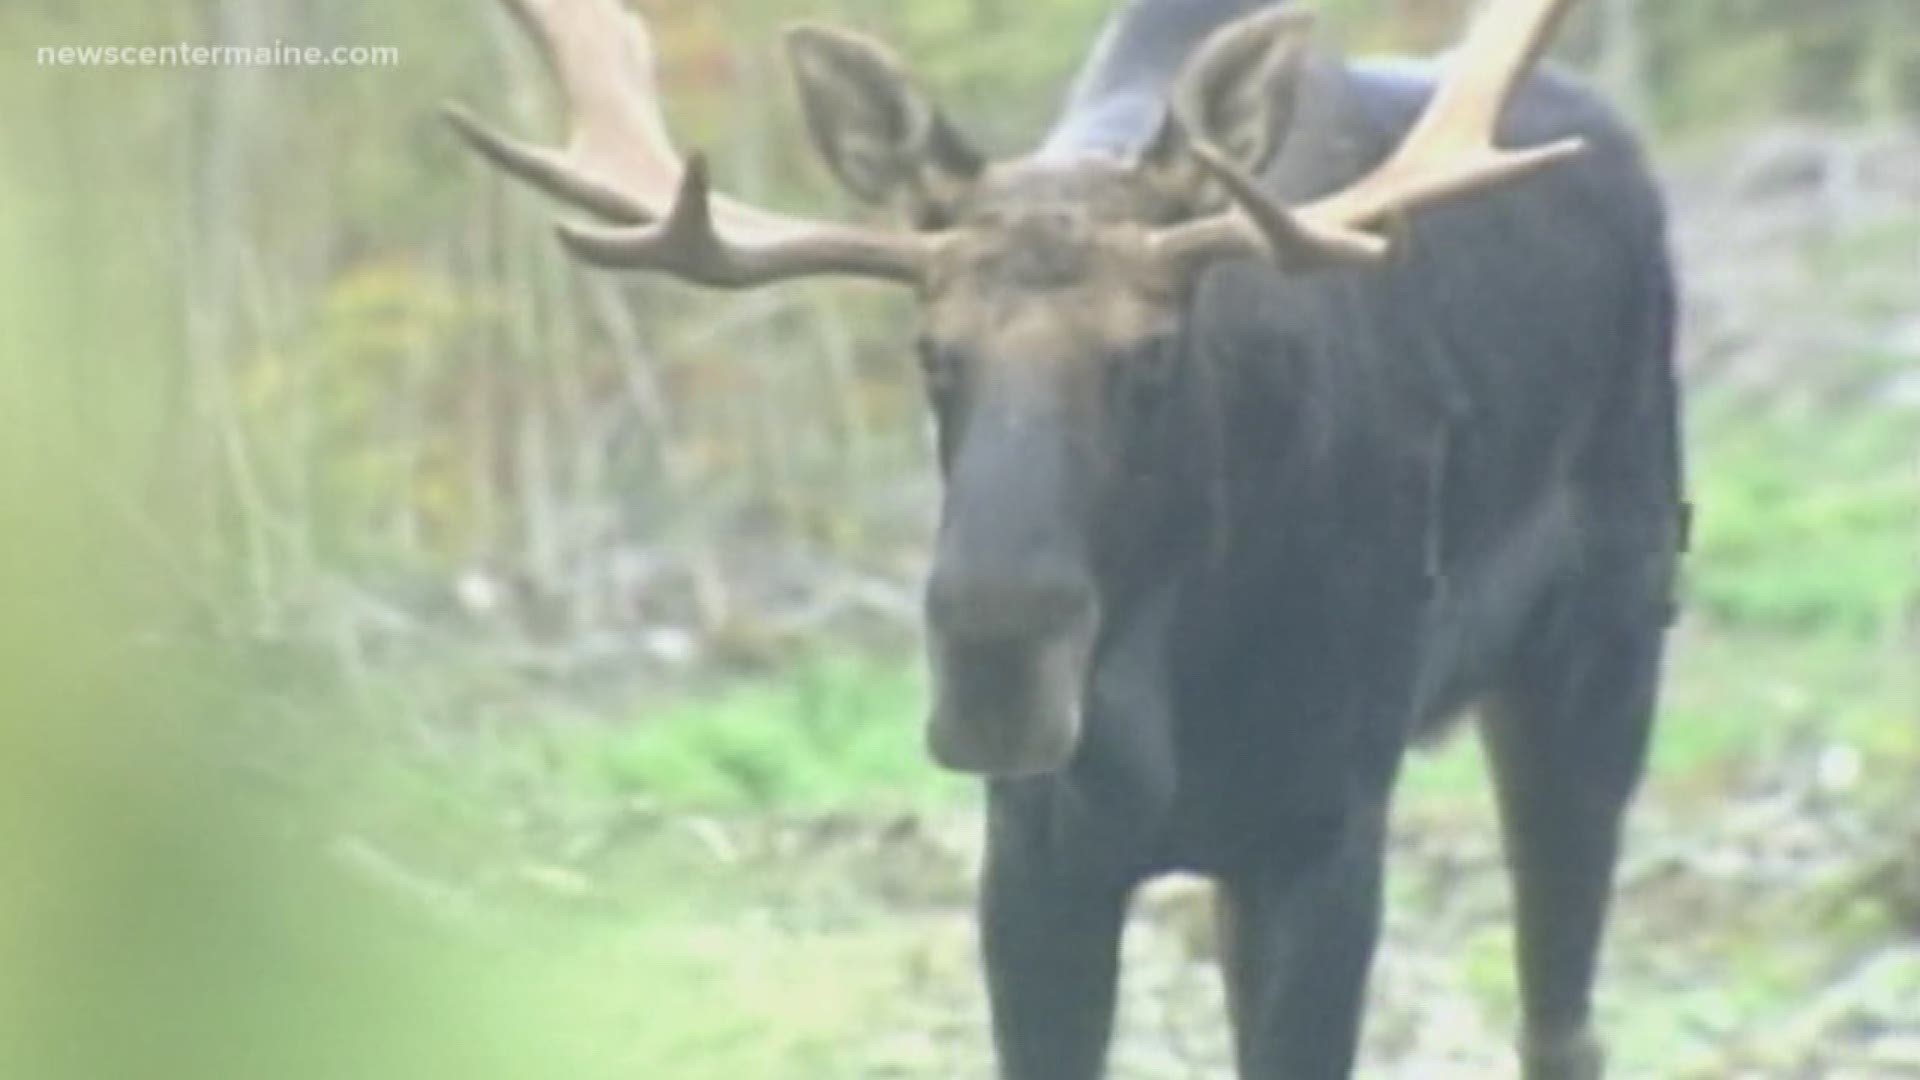 Maine wildlife biologists are recommending moose hunting permits go up by 10%.